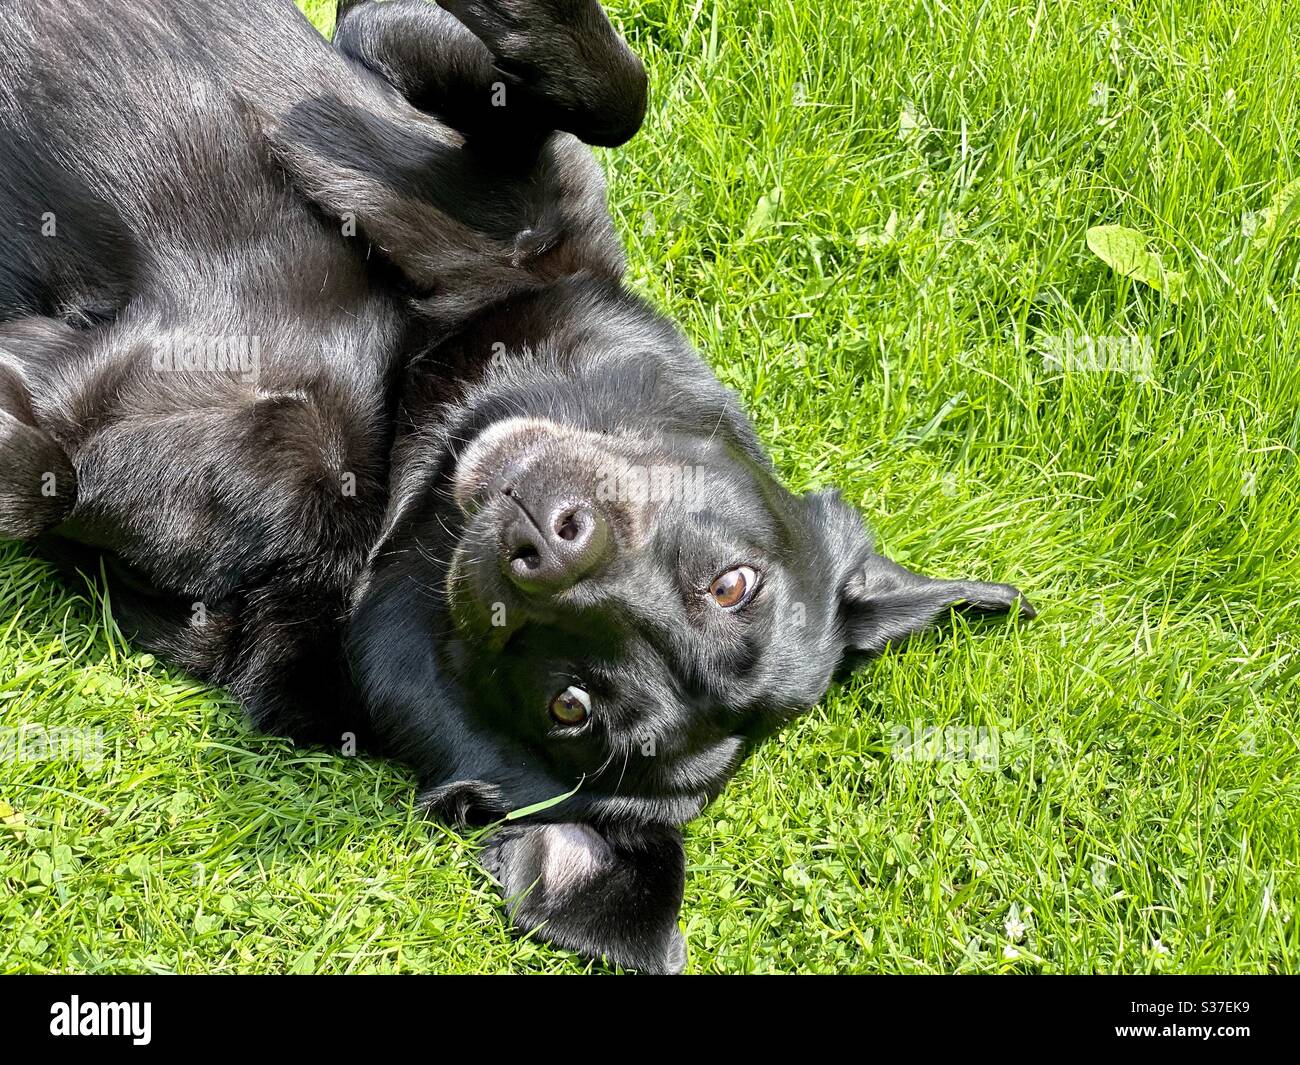 Closeup view of a happy Black Labrador pet dog rolling around in lush green grass in the garden during summer. Seen on back. Dog roll over. Nine year old mature bitch. Happy, content and playful. Stock Photo